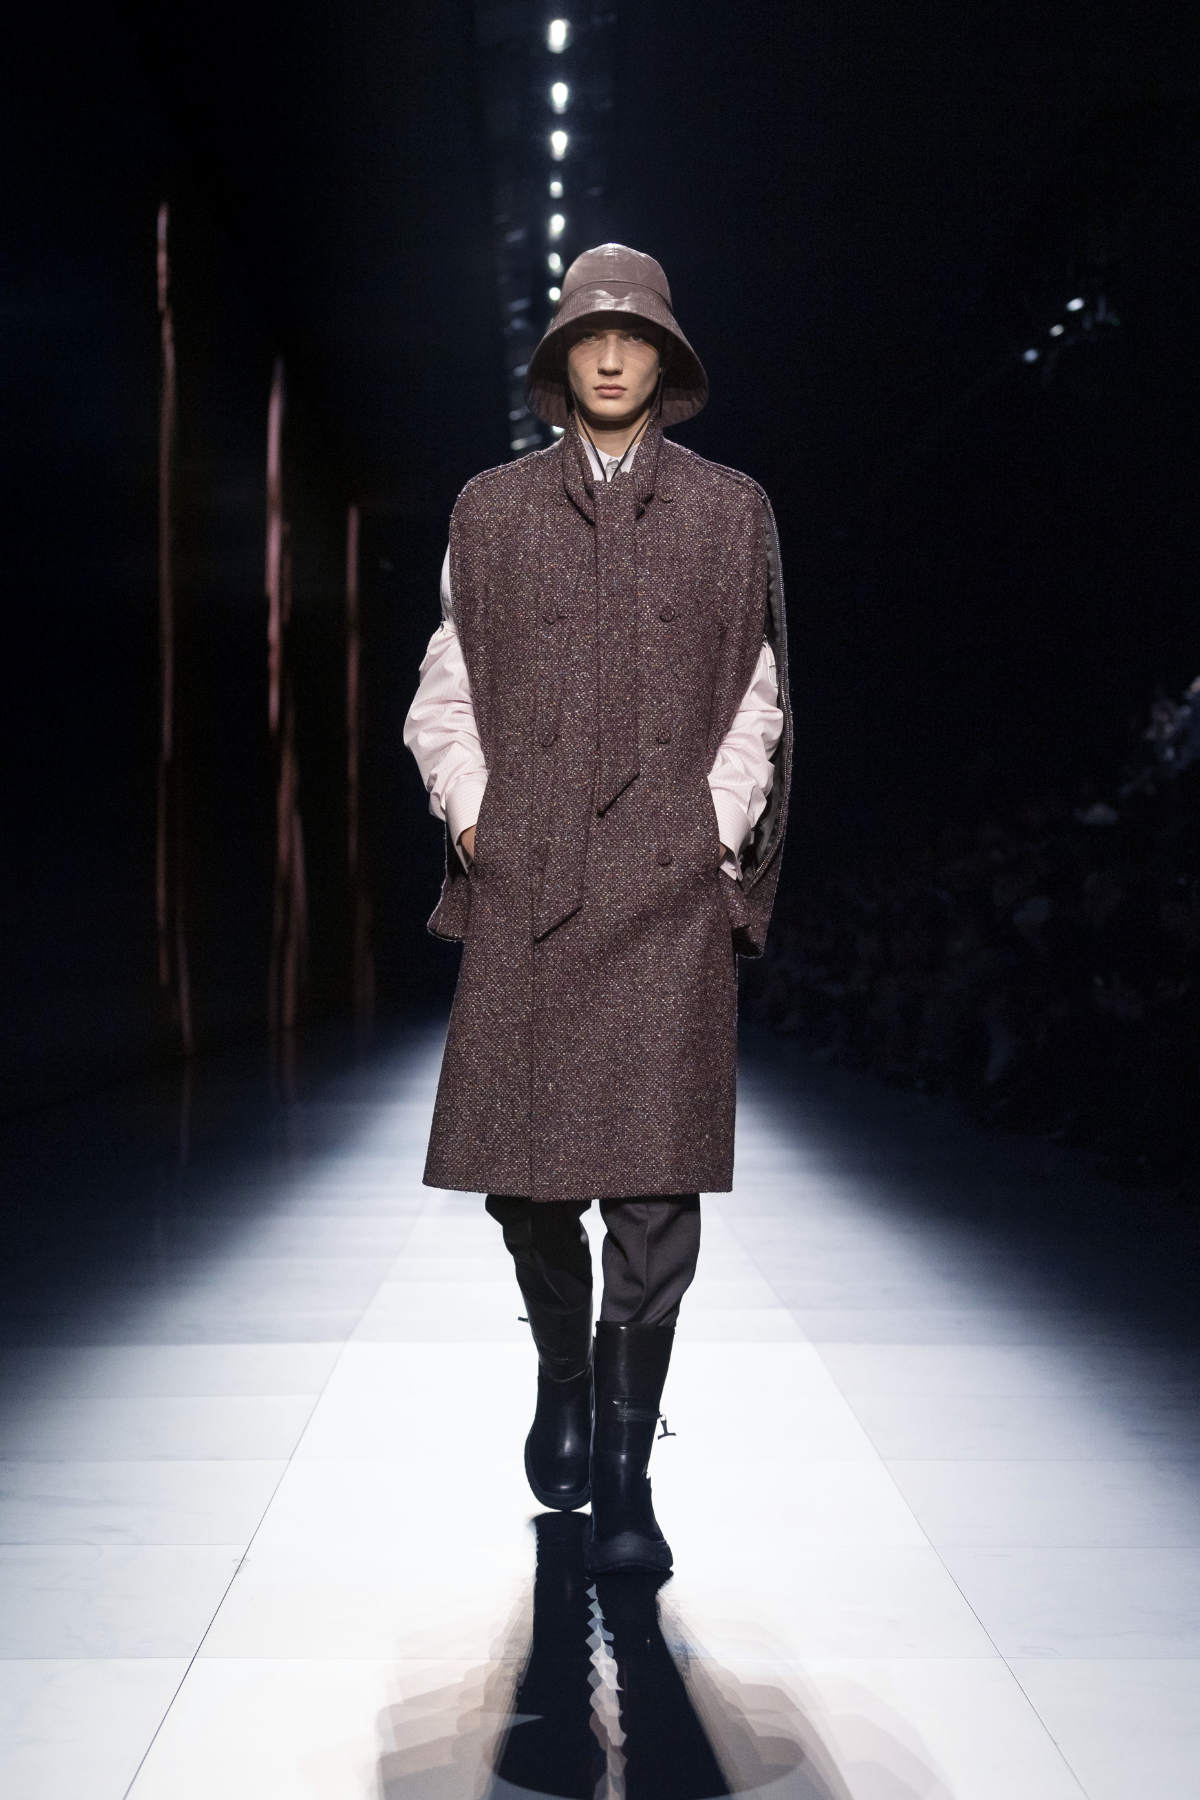 Dior Presents Its New Winter 2023-2024 Men’s Collection